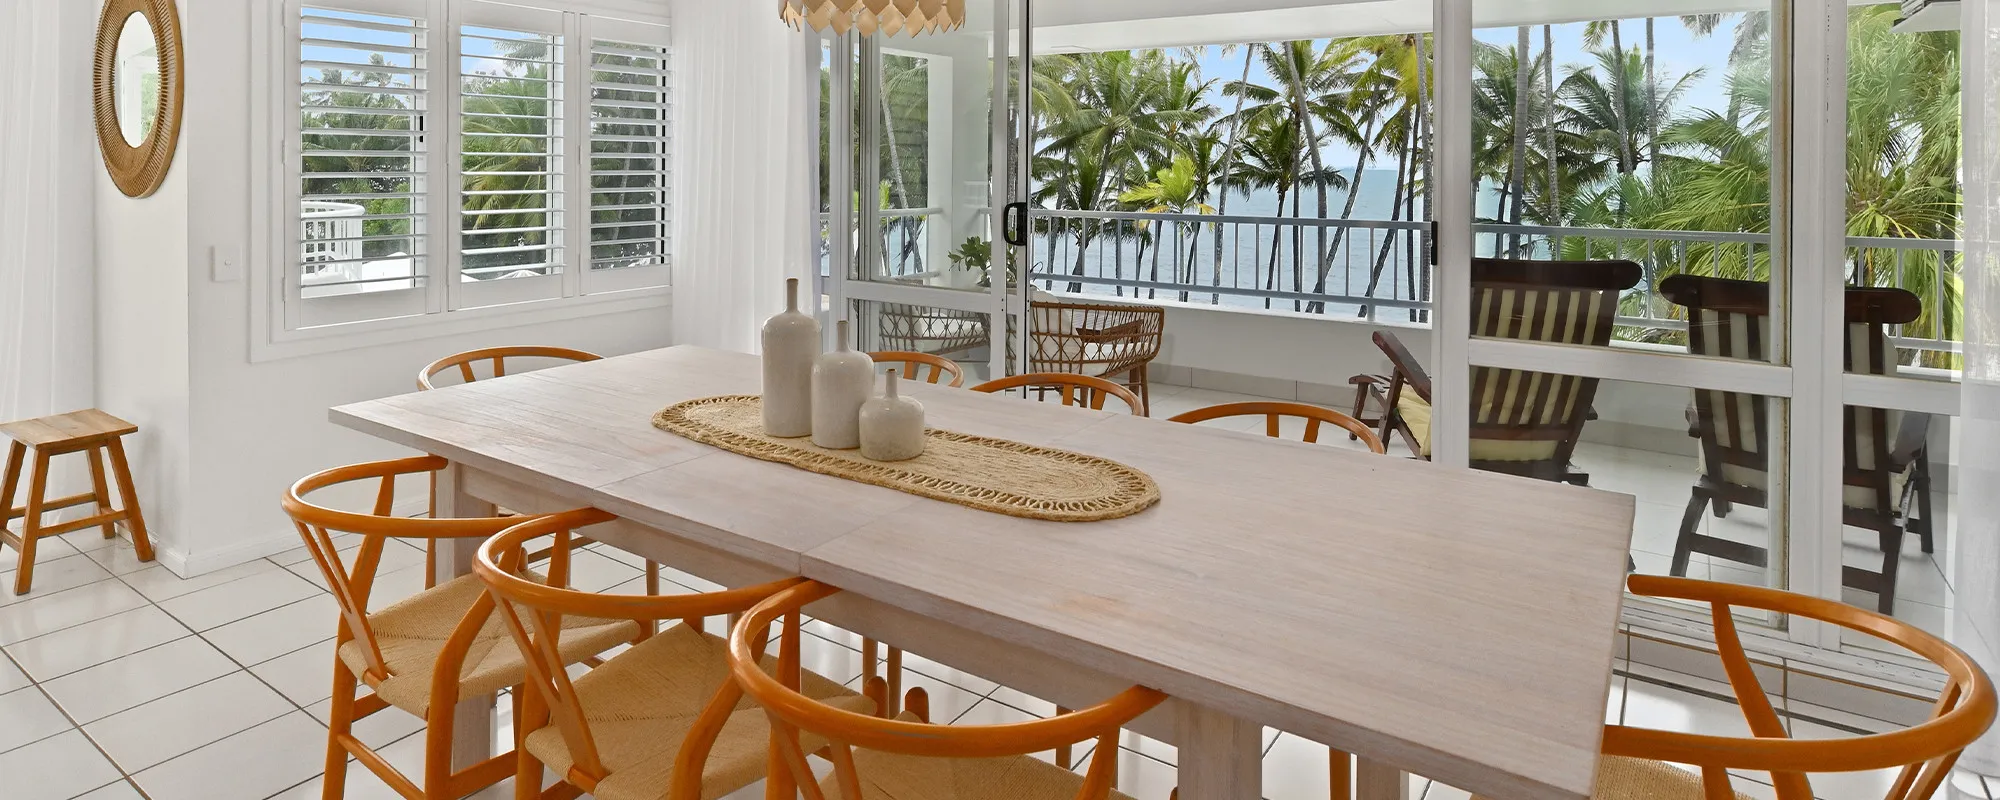 Alamanda Palm Cove by Lancemore Boutique Luxury Accommodation Four Bedroom Apartment 2000 x 800